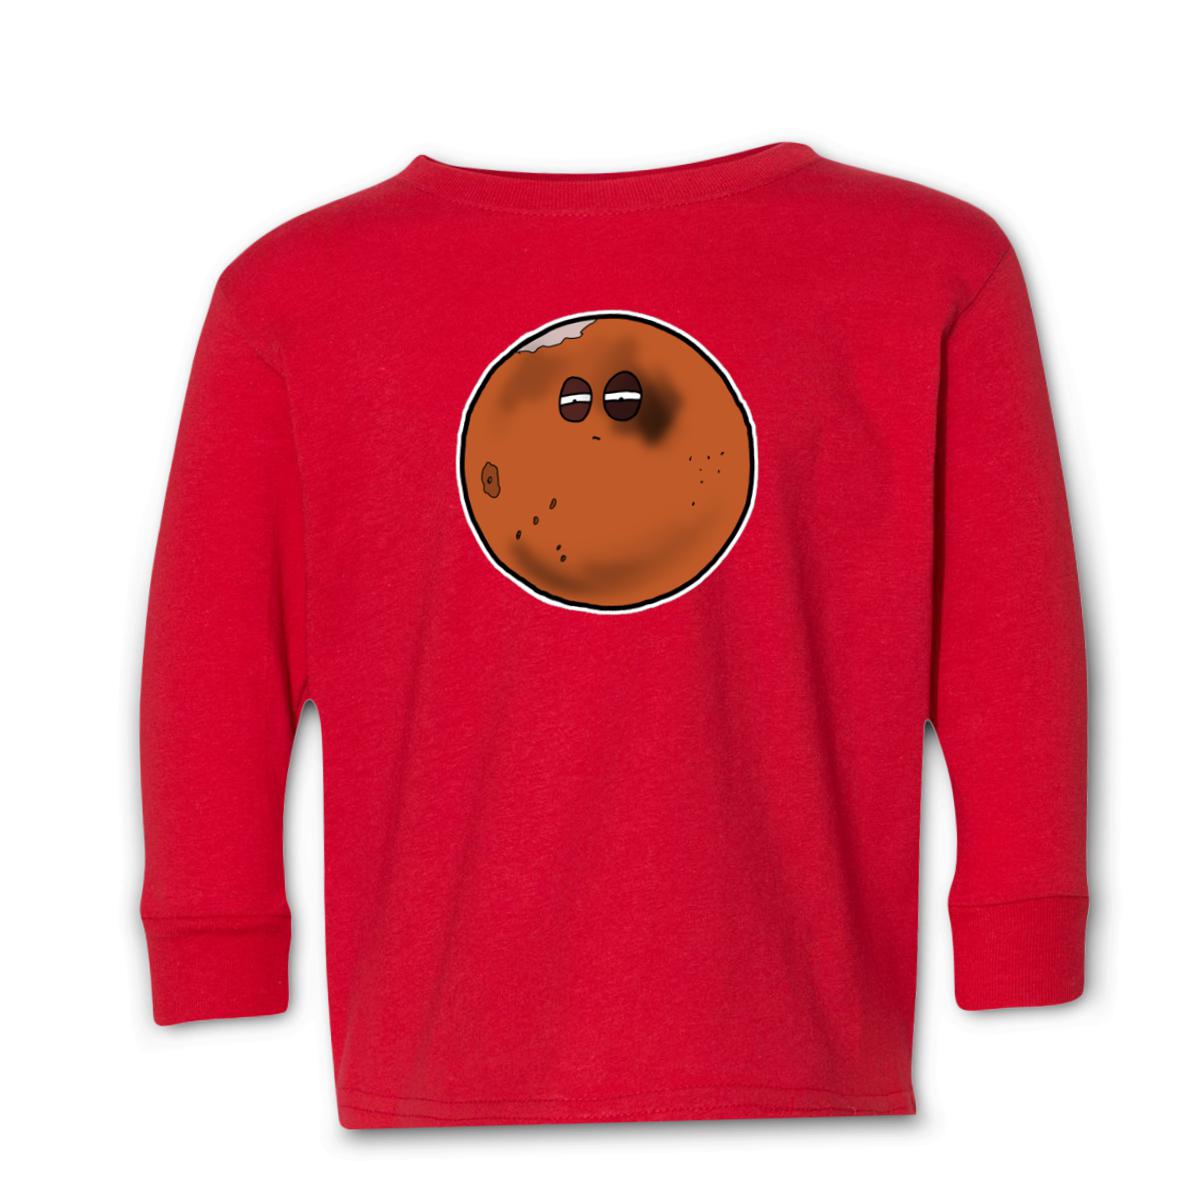 Mars Toddler Long Sleeve Tee 2T red